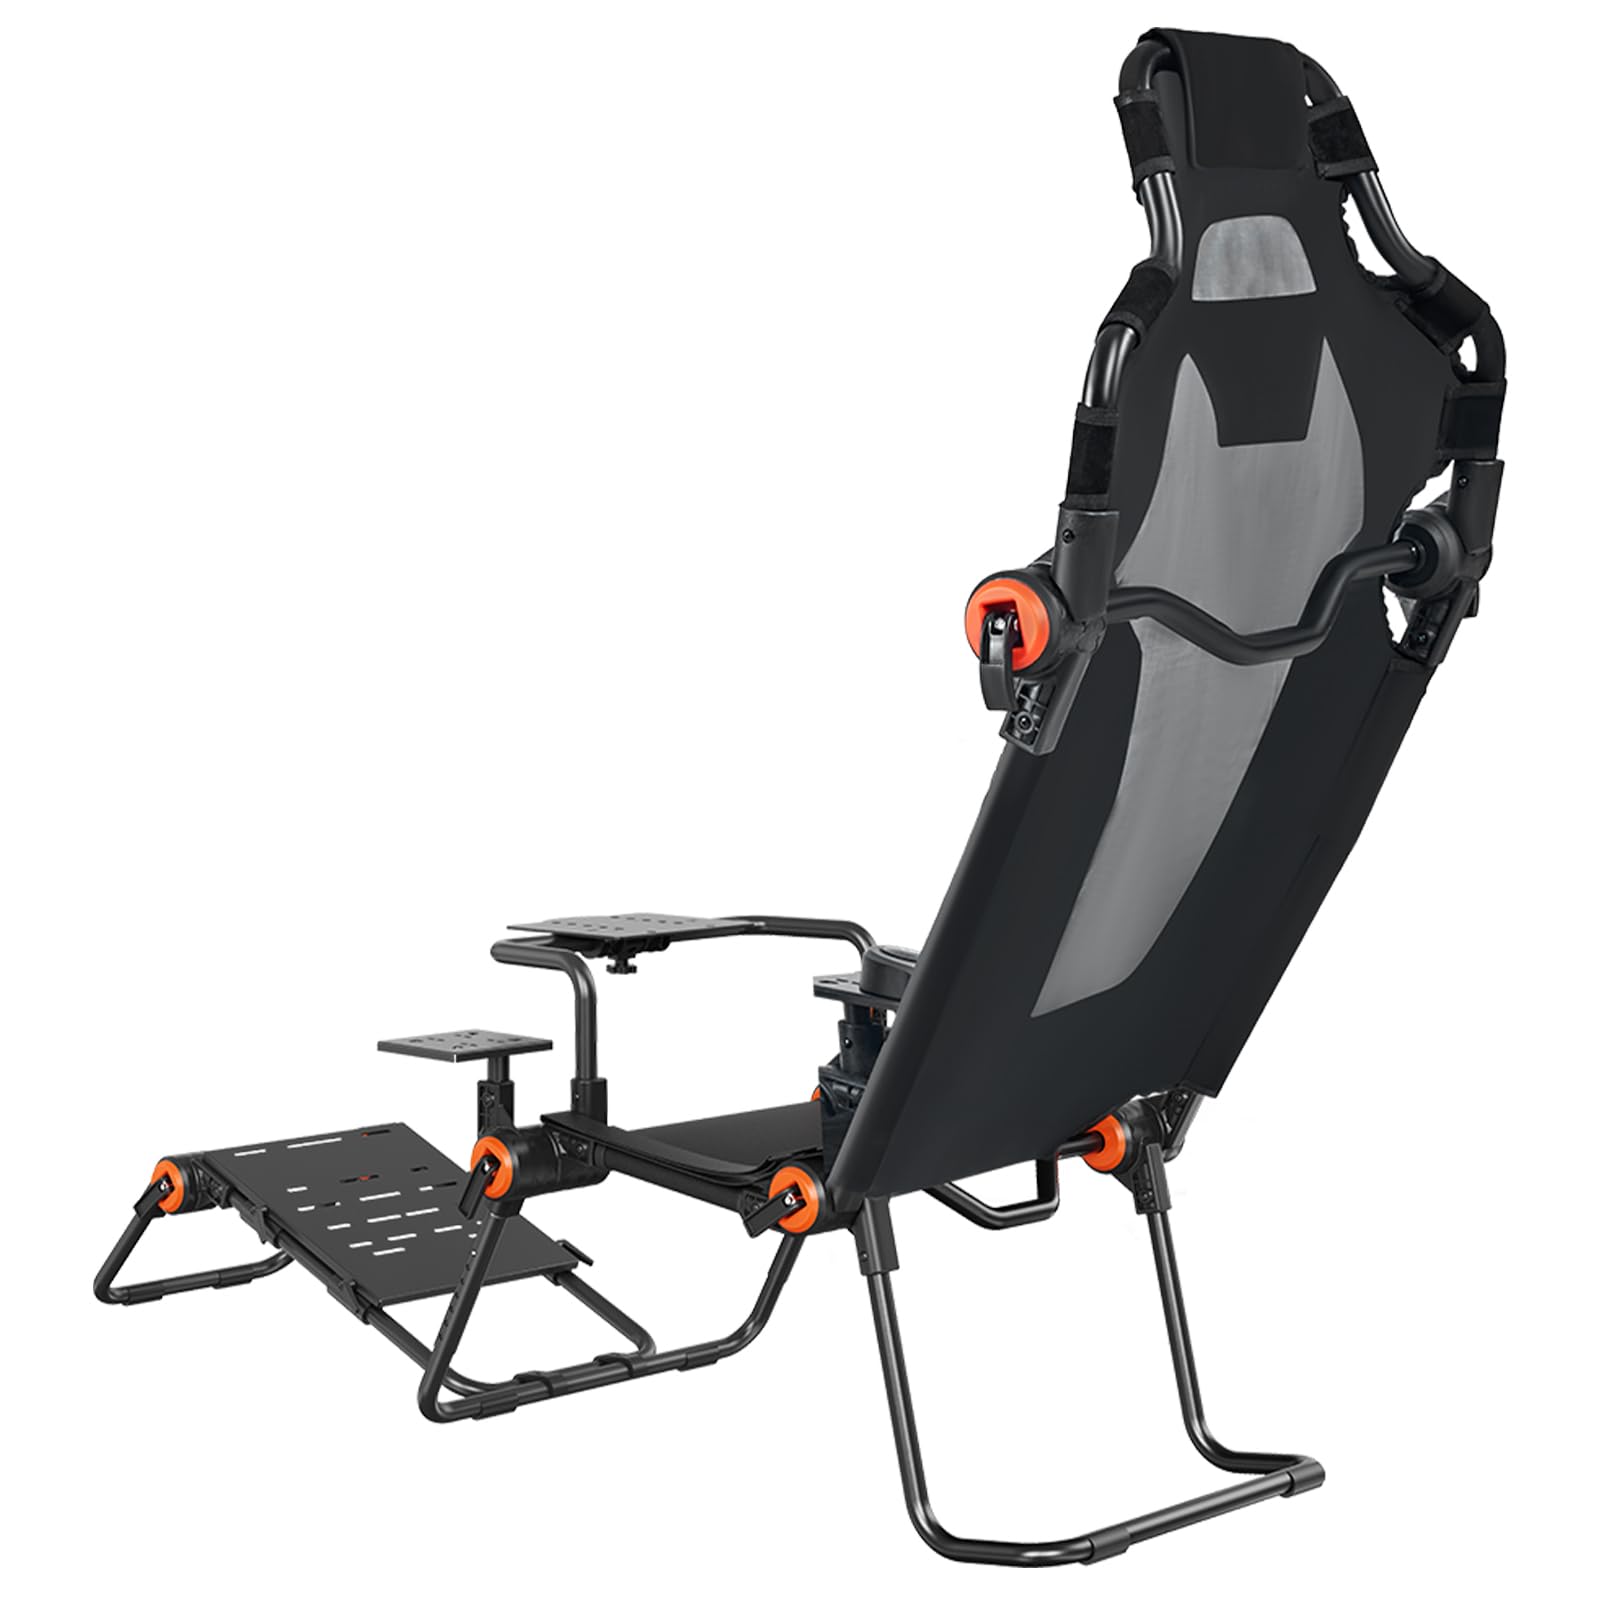 VEVOR Racing Wheel Stand Foldable Fit for Logitech,Thrustmaster,Fanatec,Hori,Mad Catz, Carbon Steel Driving Simulator Cockpit Adjustable Pedal & Dual-Mode Seating,Fit Most Steering Wheels and Pedals